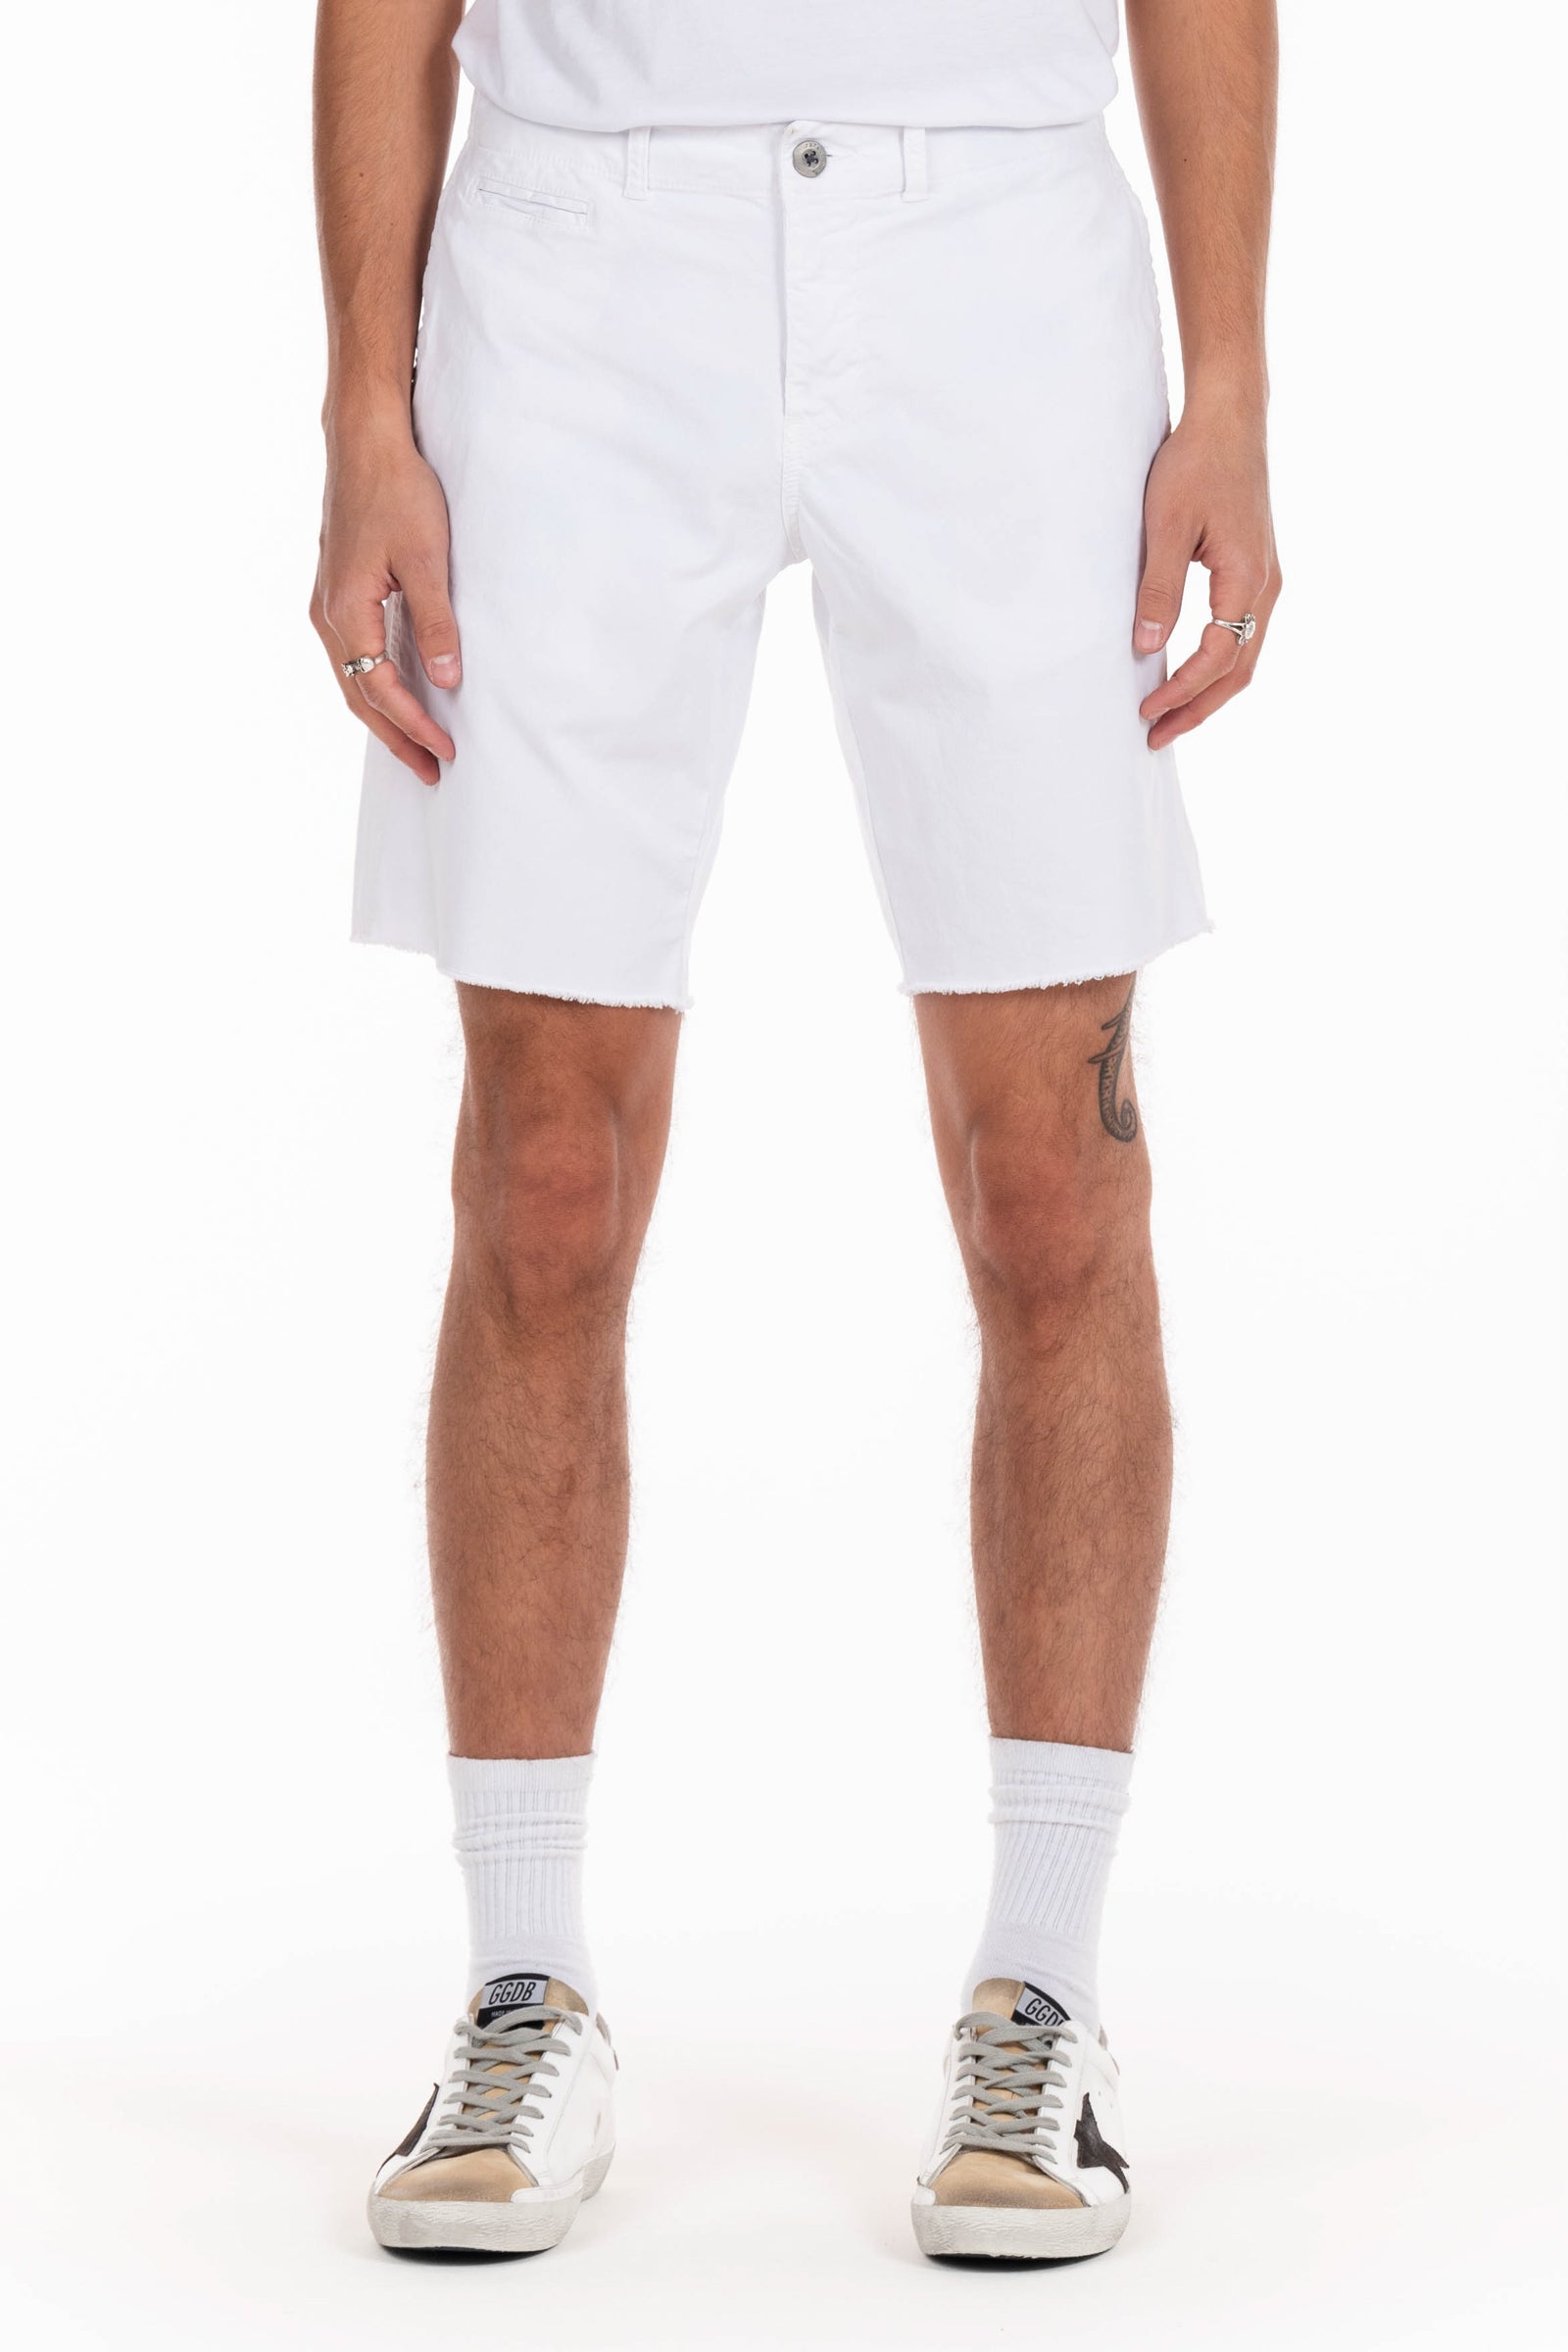 Original Paperbacks Rockland Chino Short in White on Model Cropped Front View